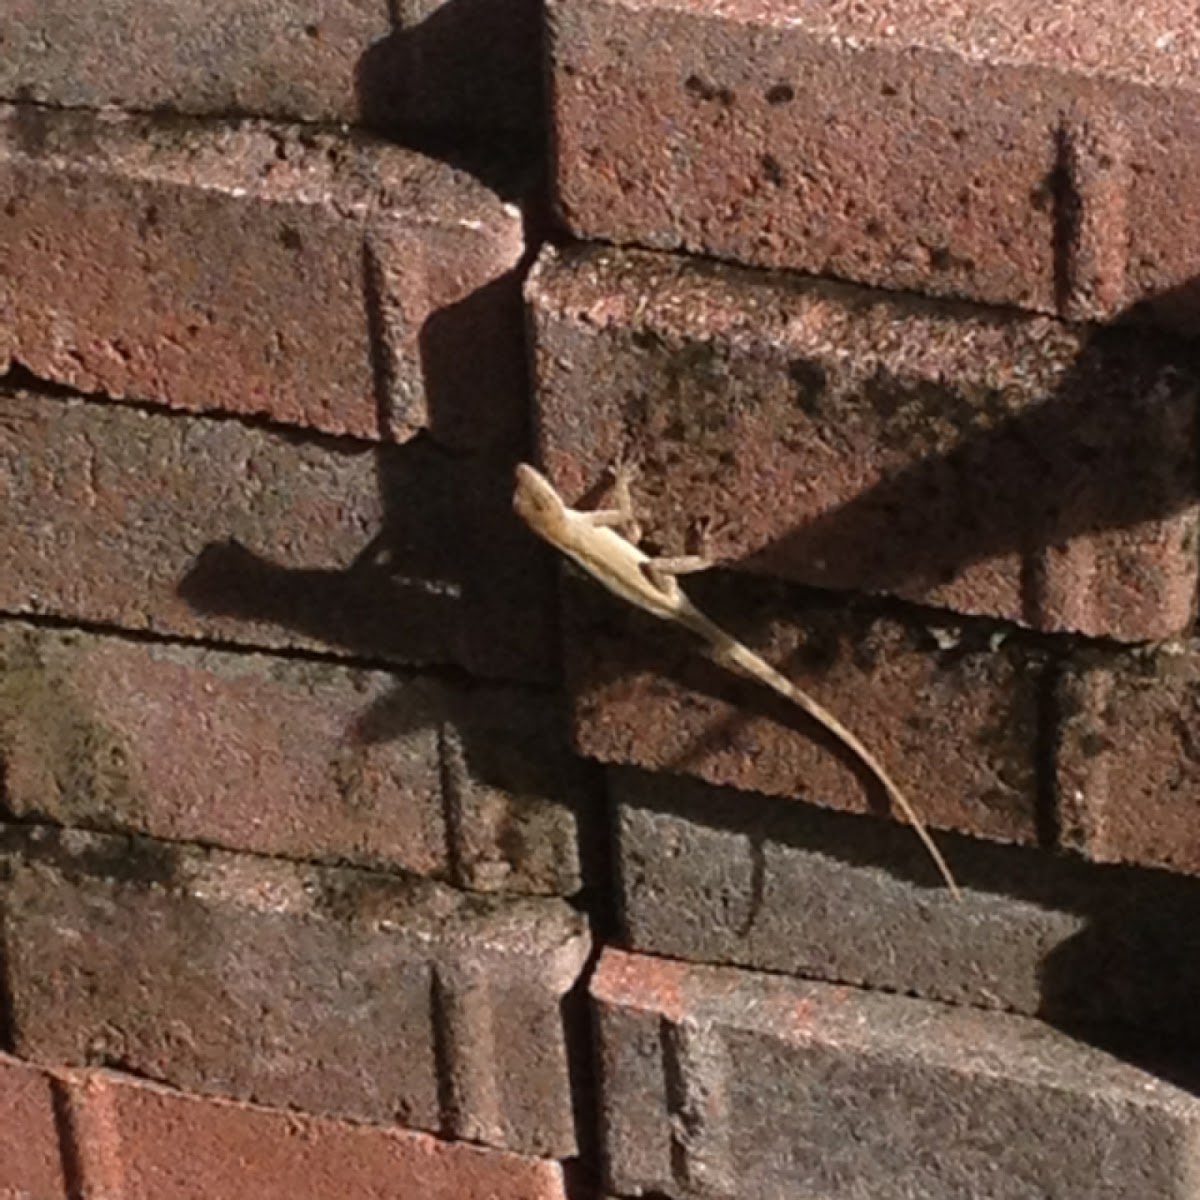 brown anole